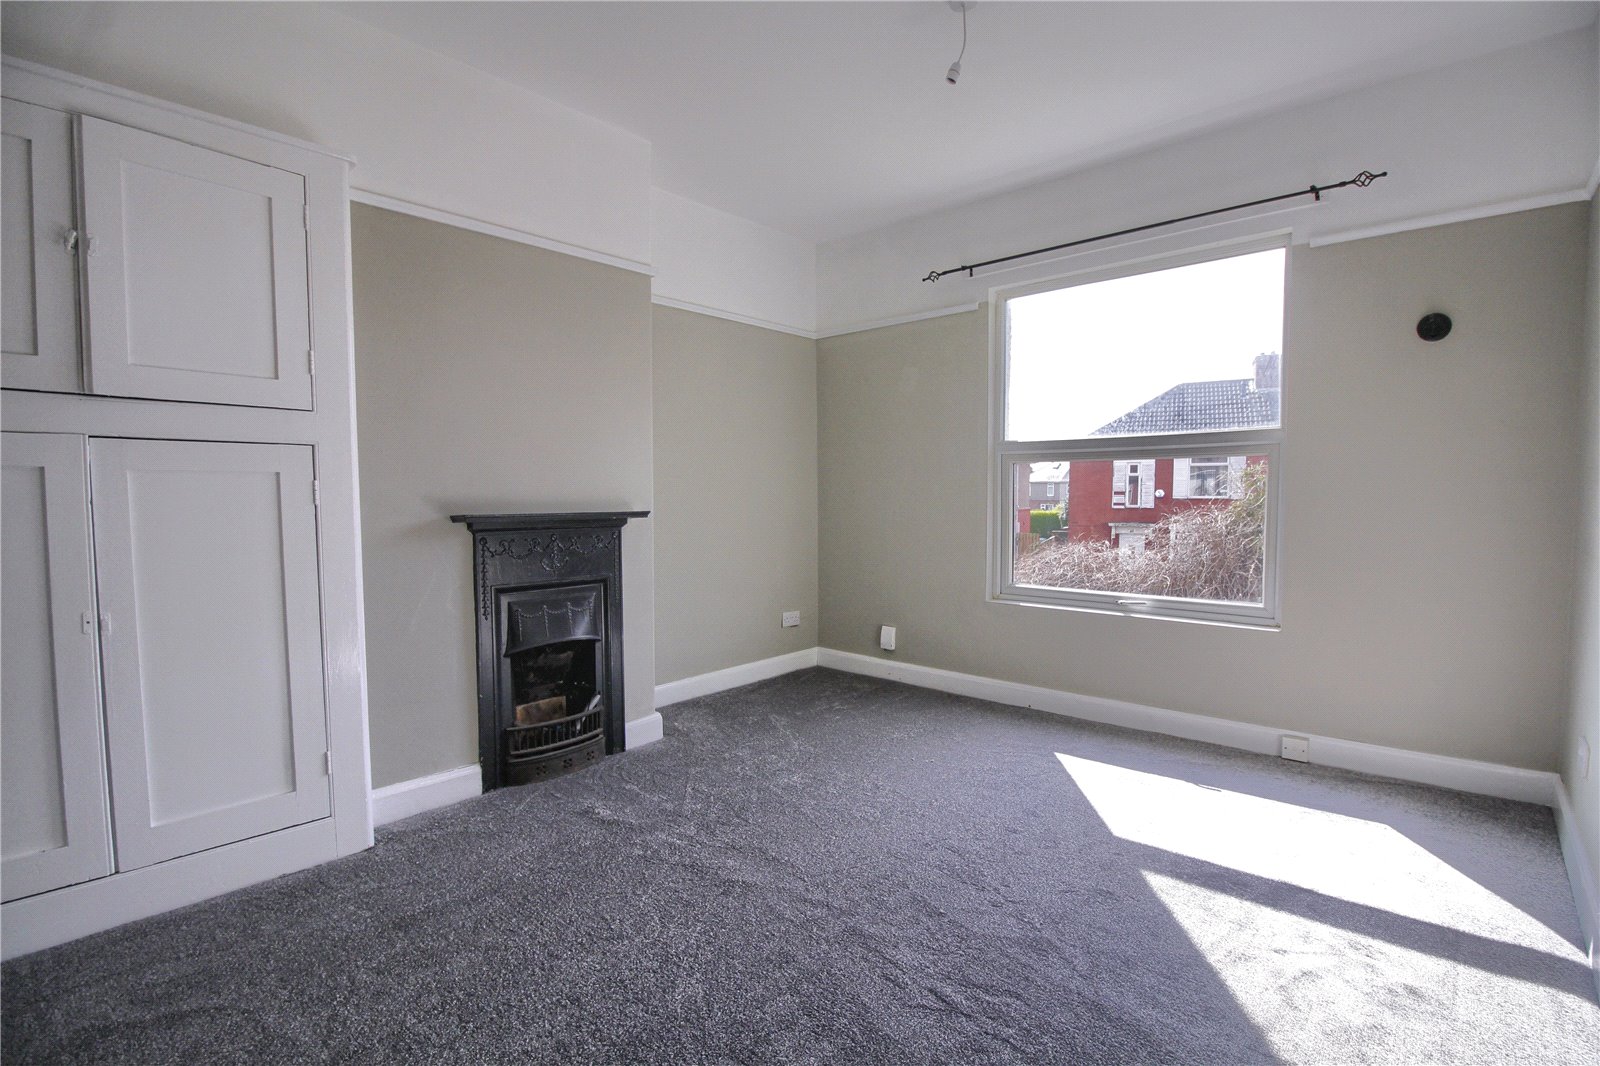 3 bed house to rent in Norton Avenue, Stockton-on-Tees  - Property Image 5